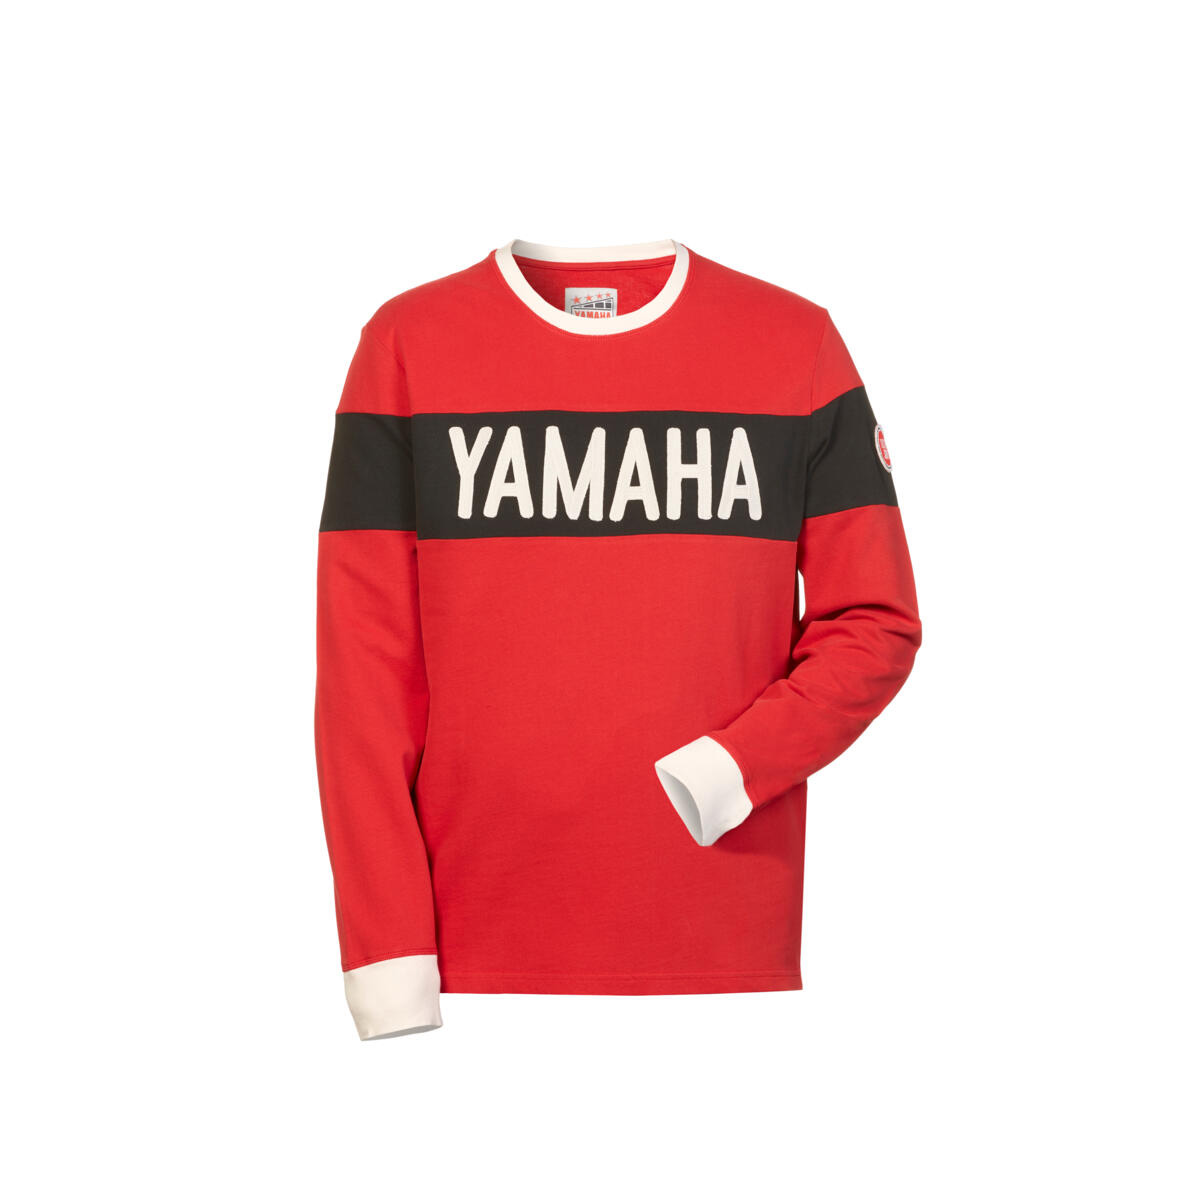 Yamaha clothing and apparel range available online